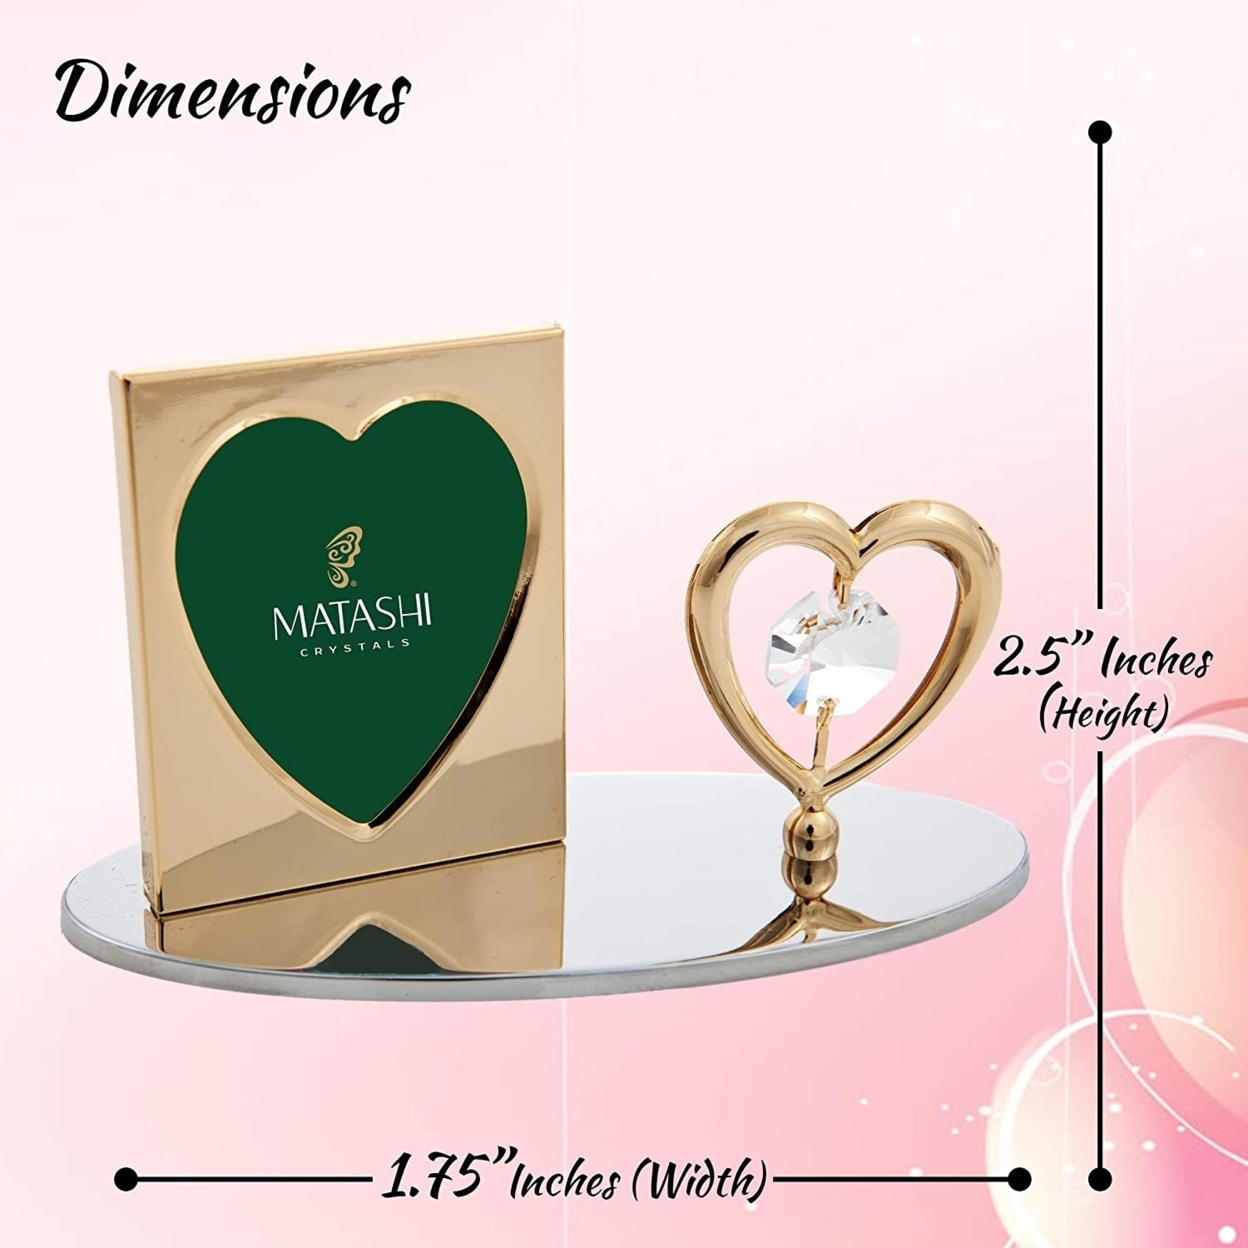 24K Gold Plated Picture Frame With Crystal Studded Heart Figurine By Matashi